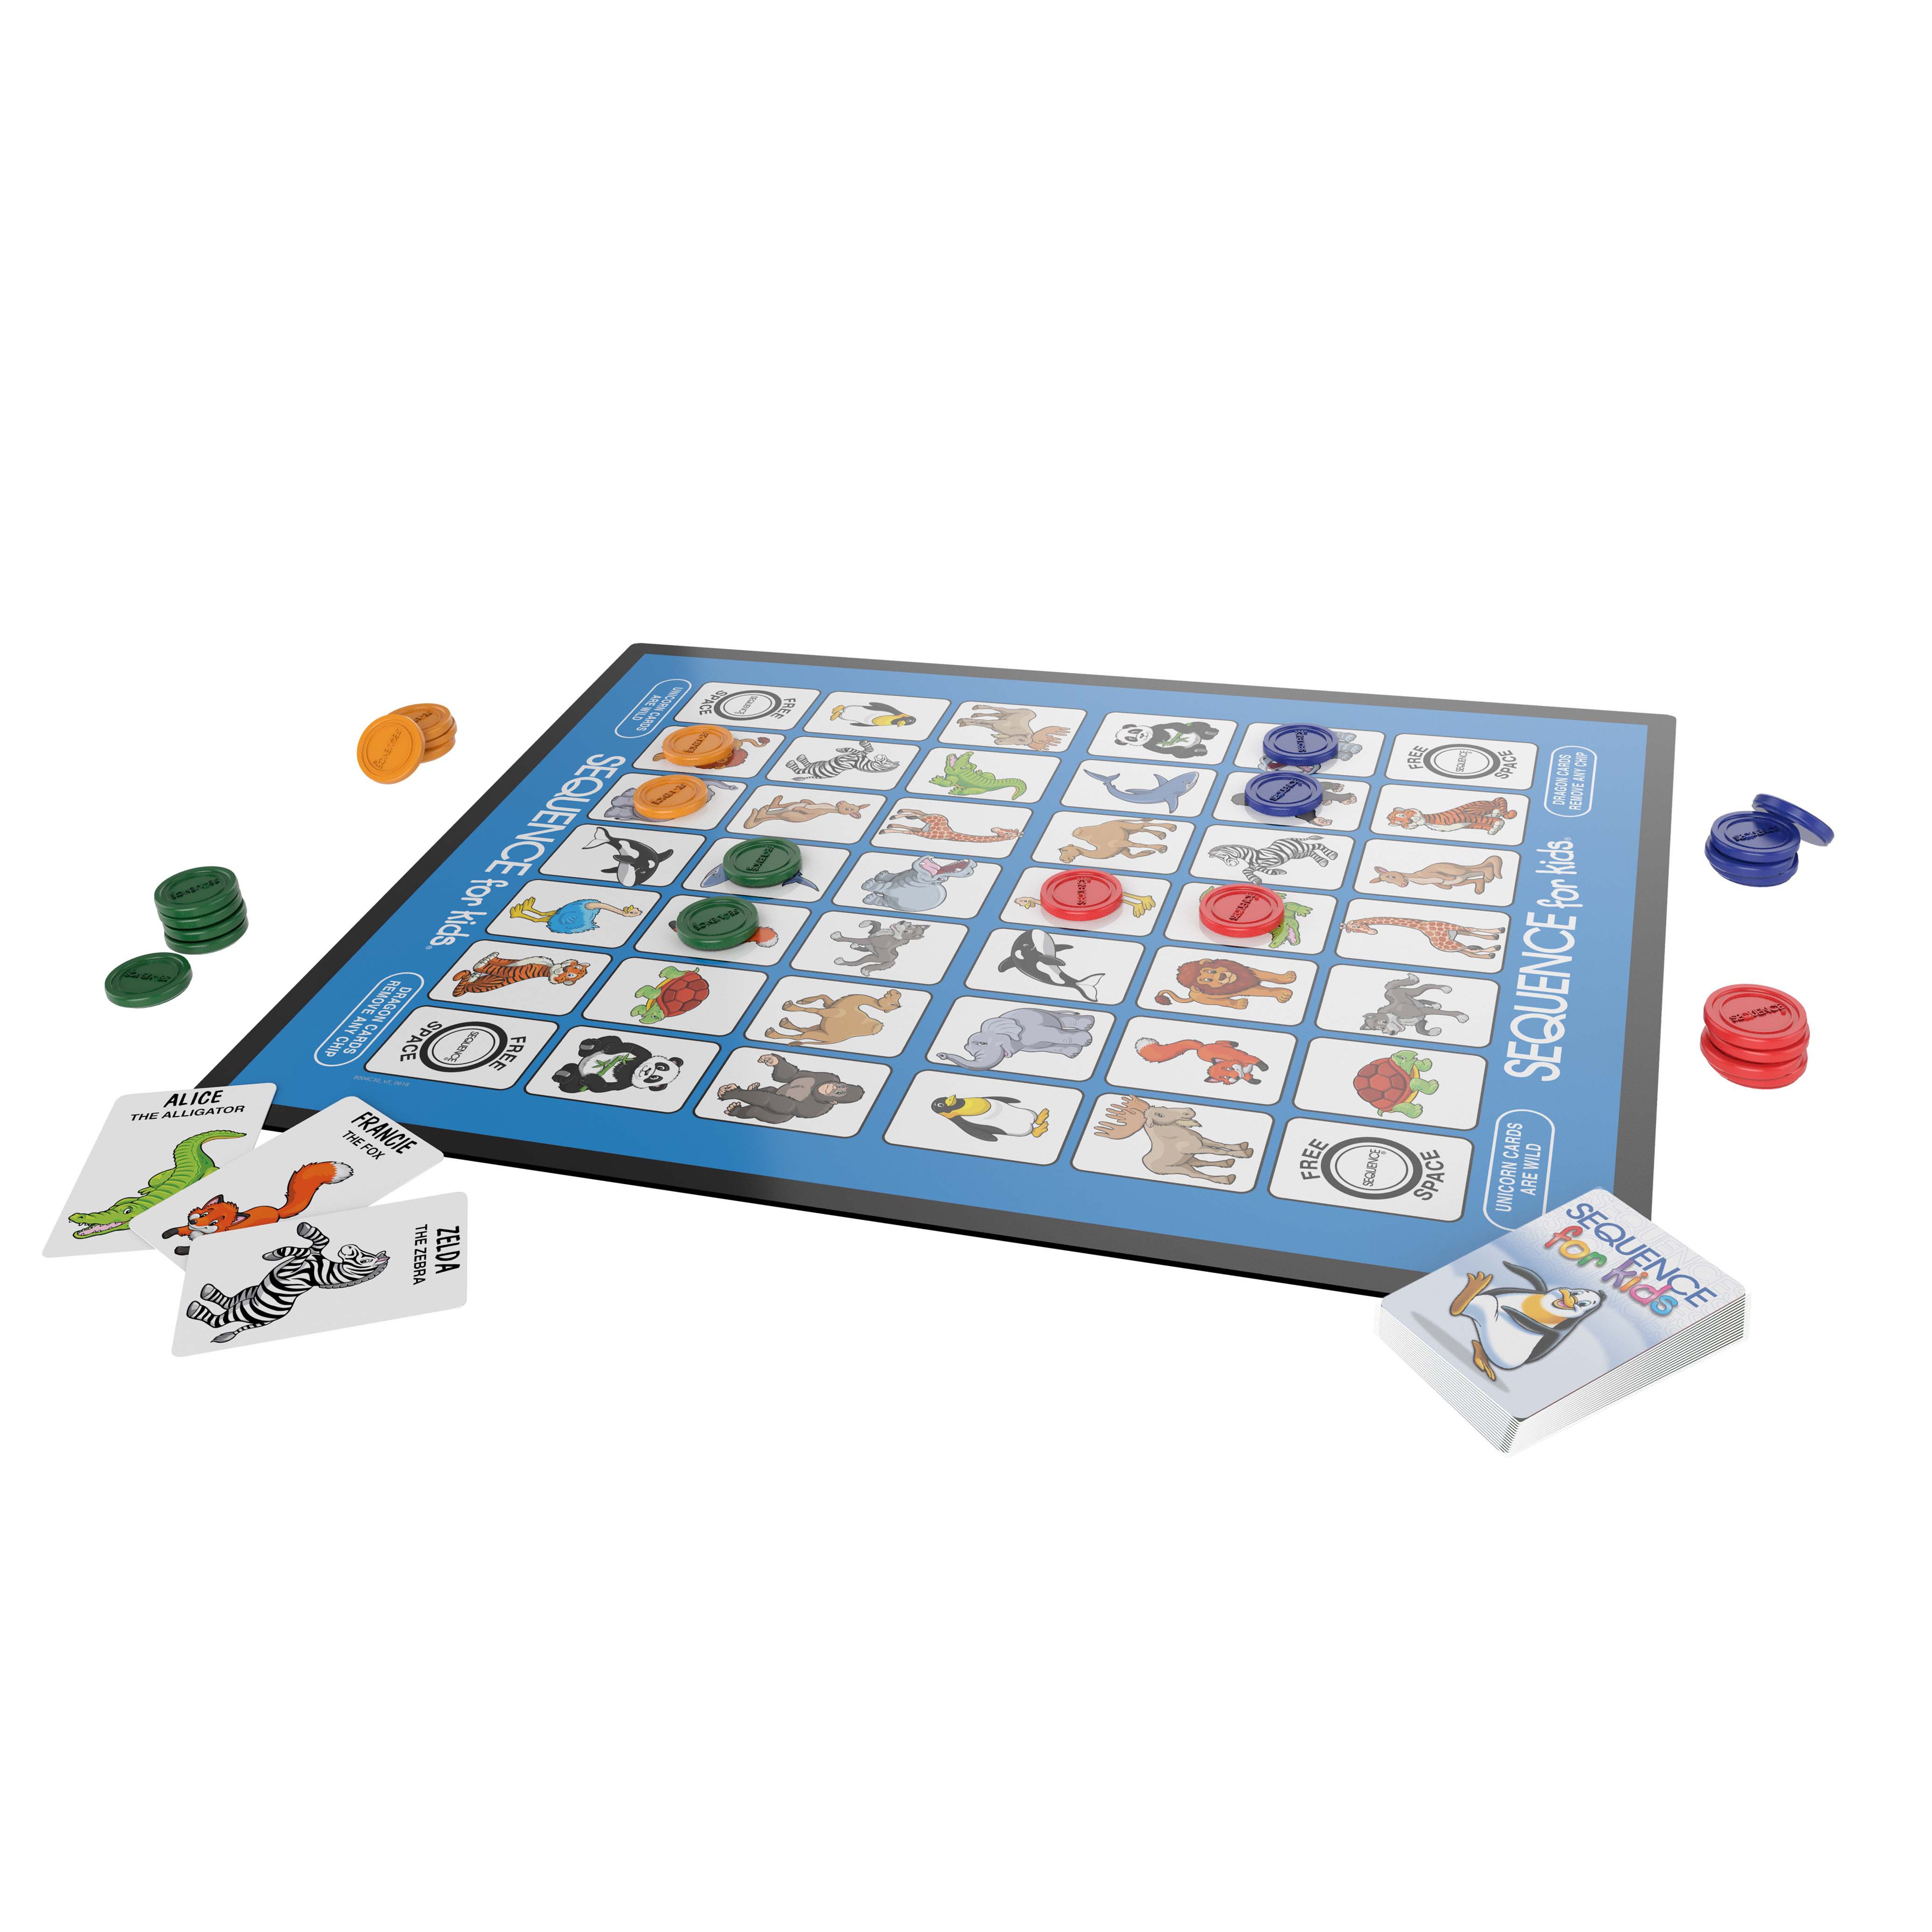 Kids Sequence Board and Card Game Strategy & Fun Playing Playset Toys Child AUS